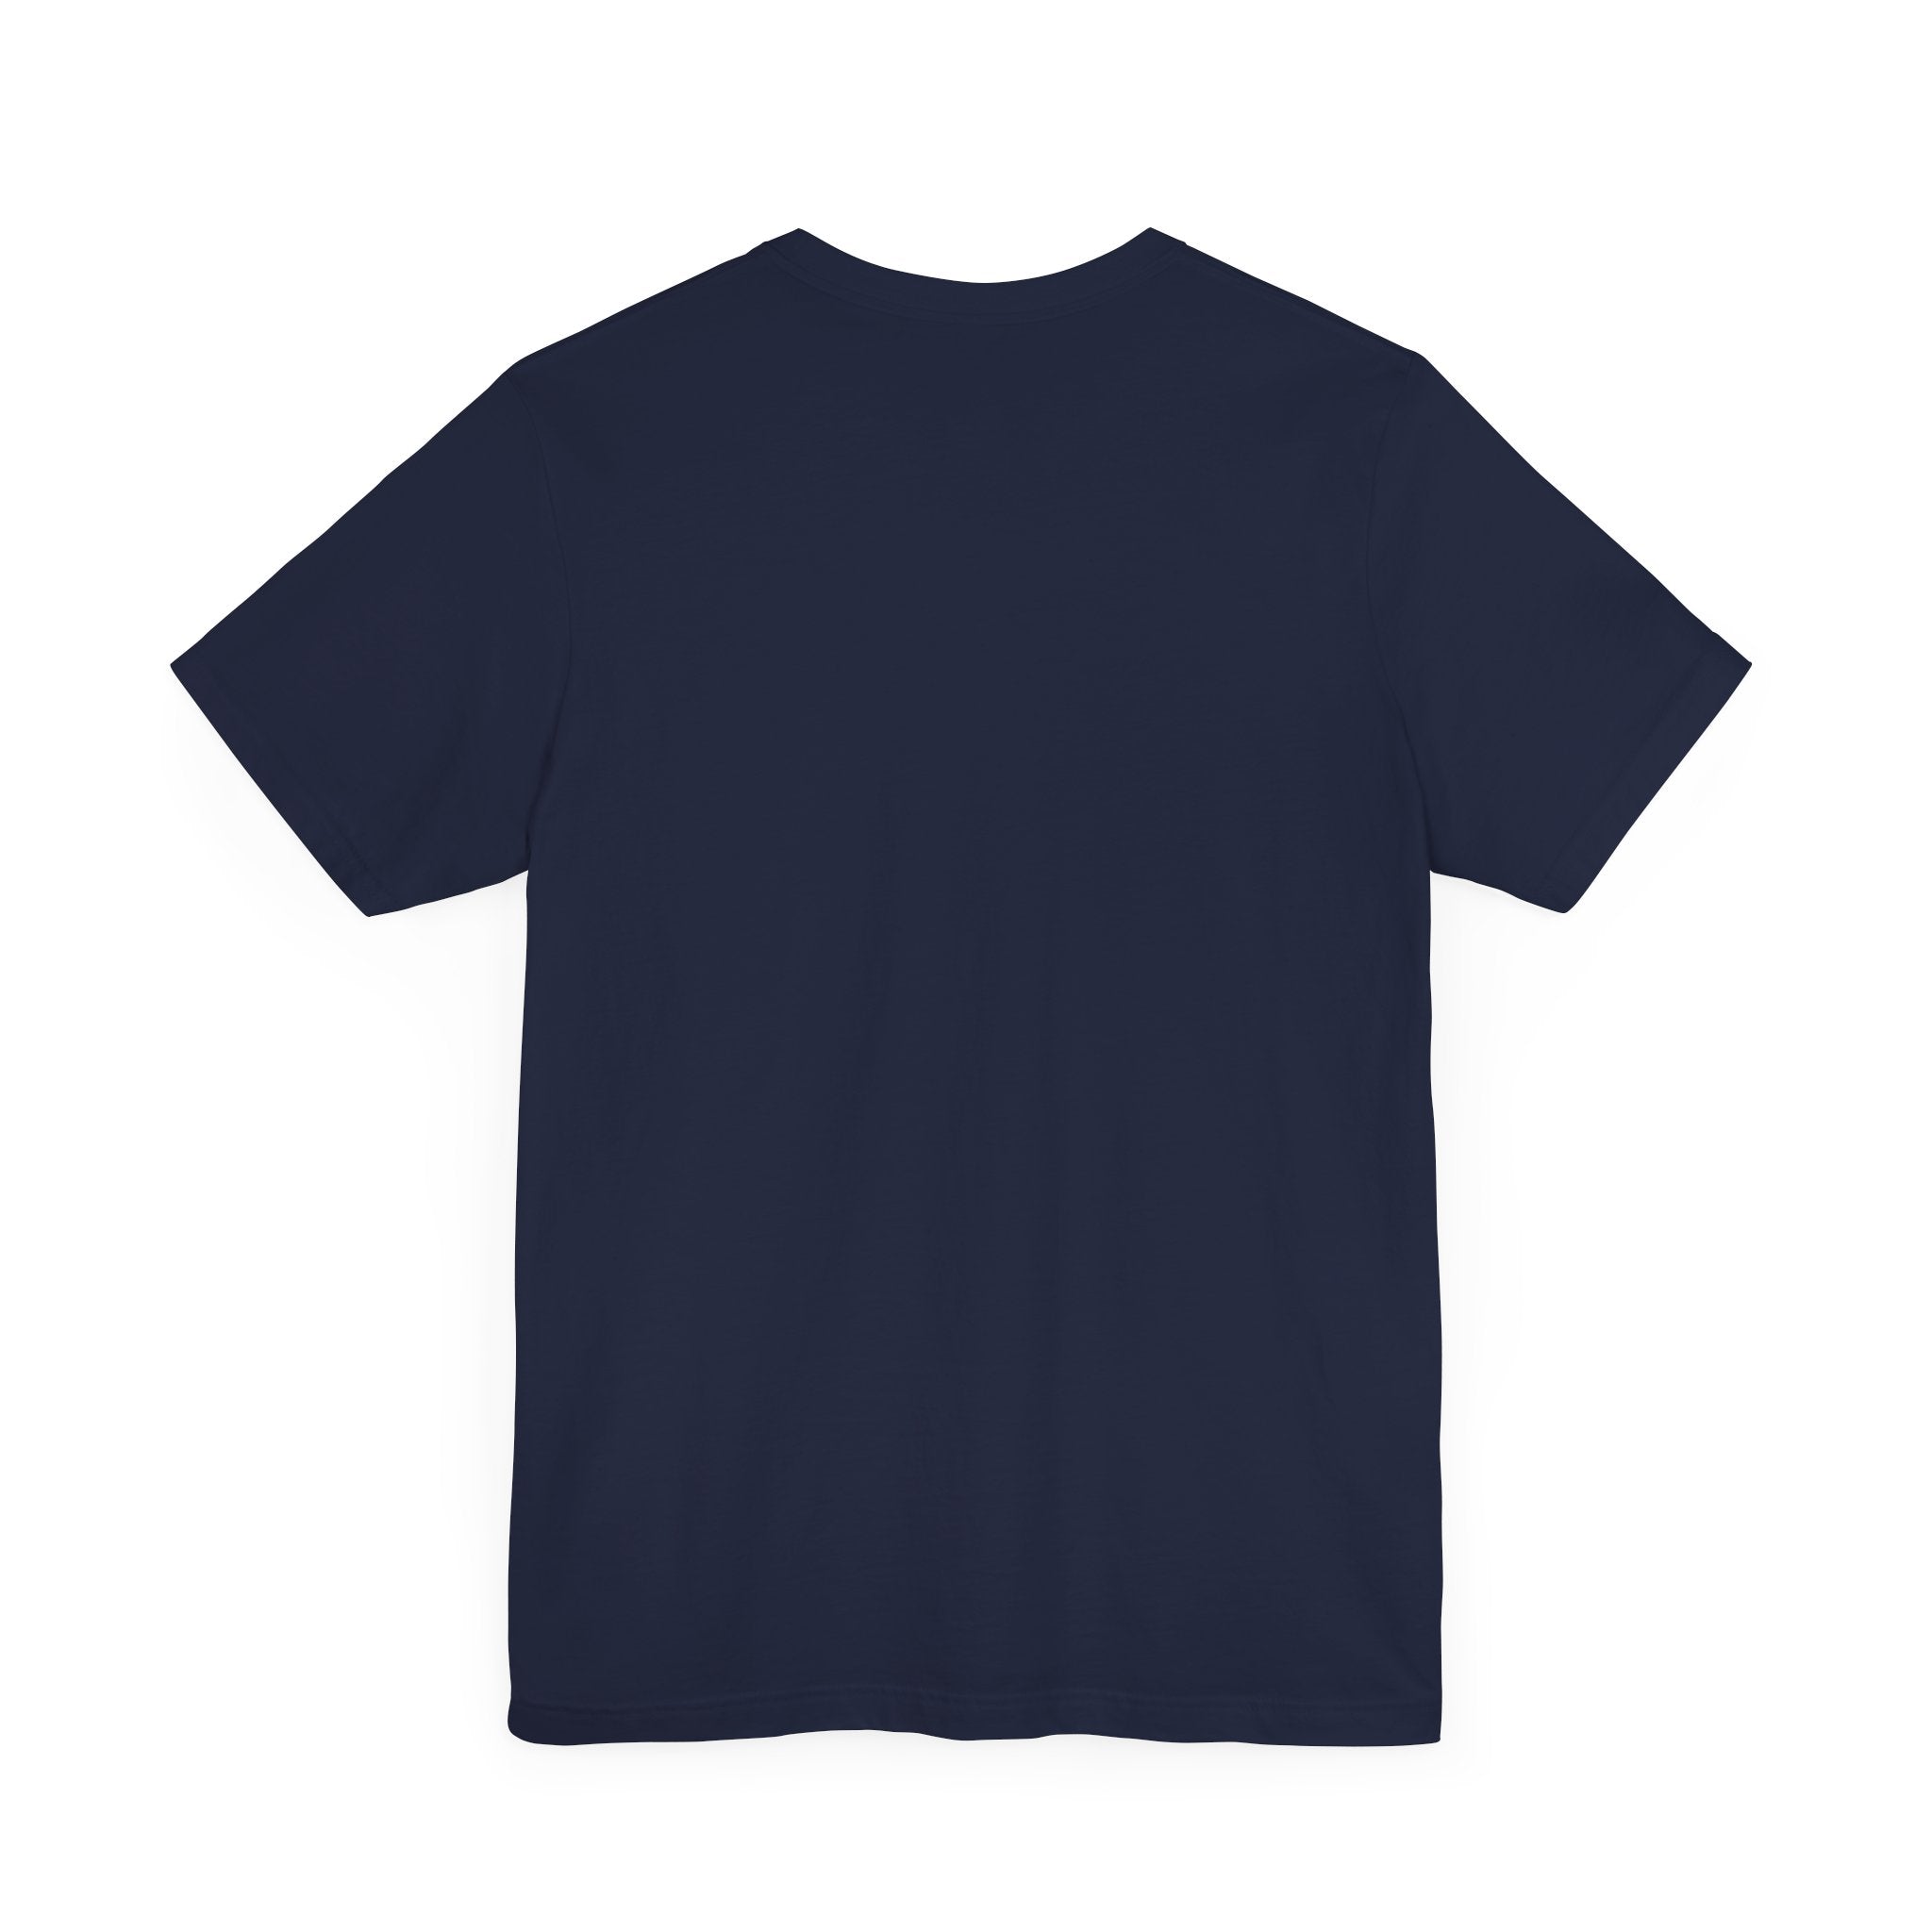 Catch the Waves surf-themed navy t-shirt with white printed logo, unisex jersey tee